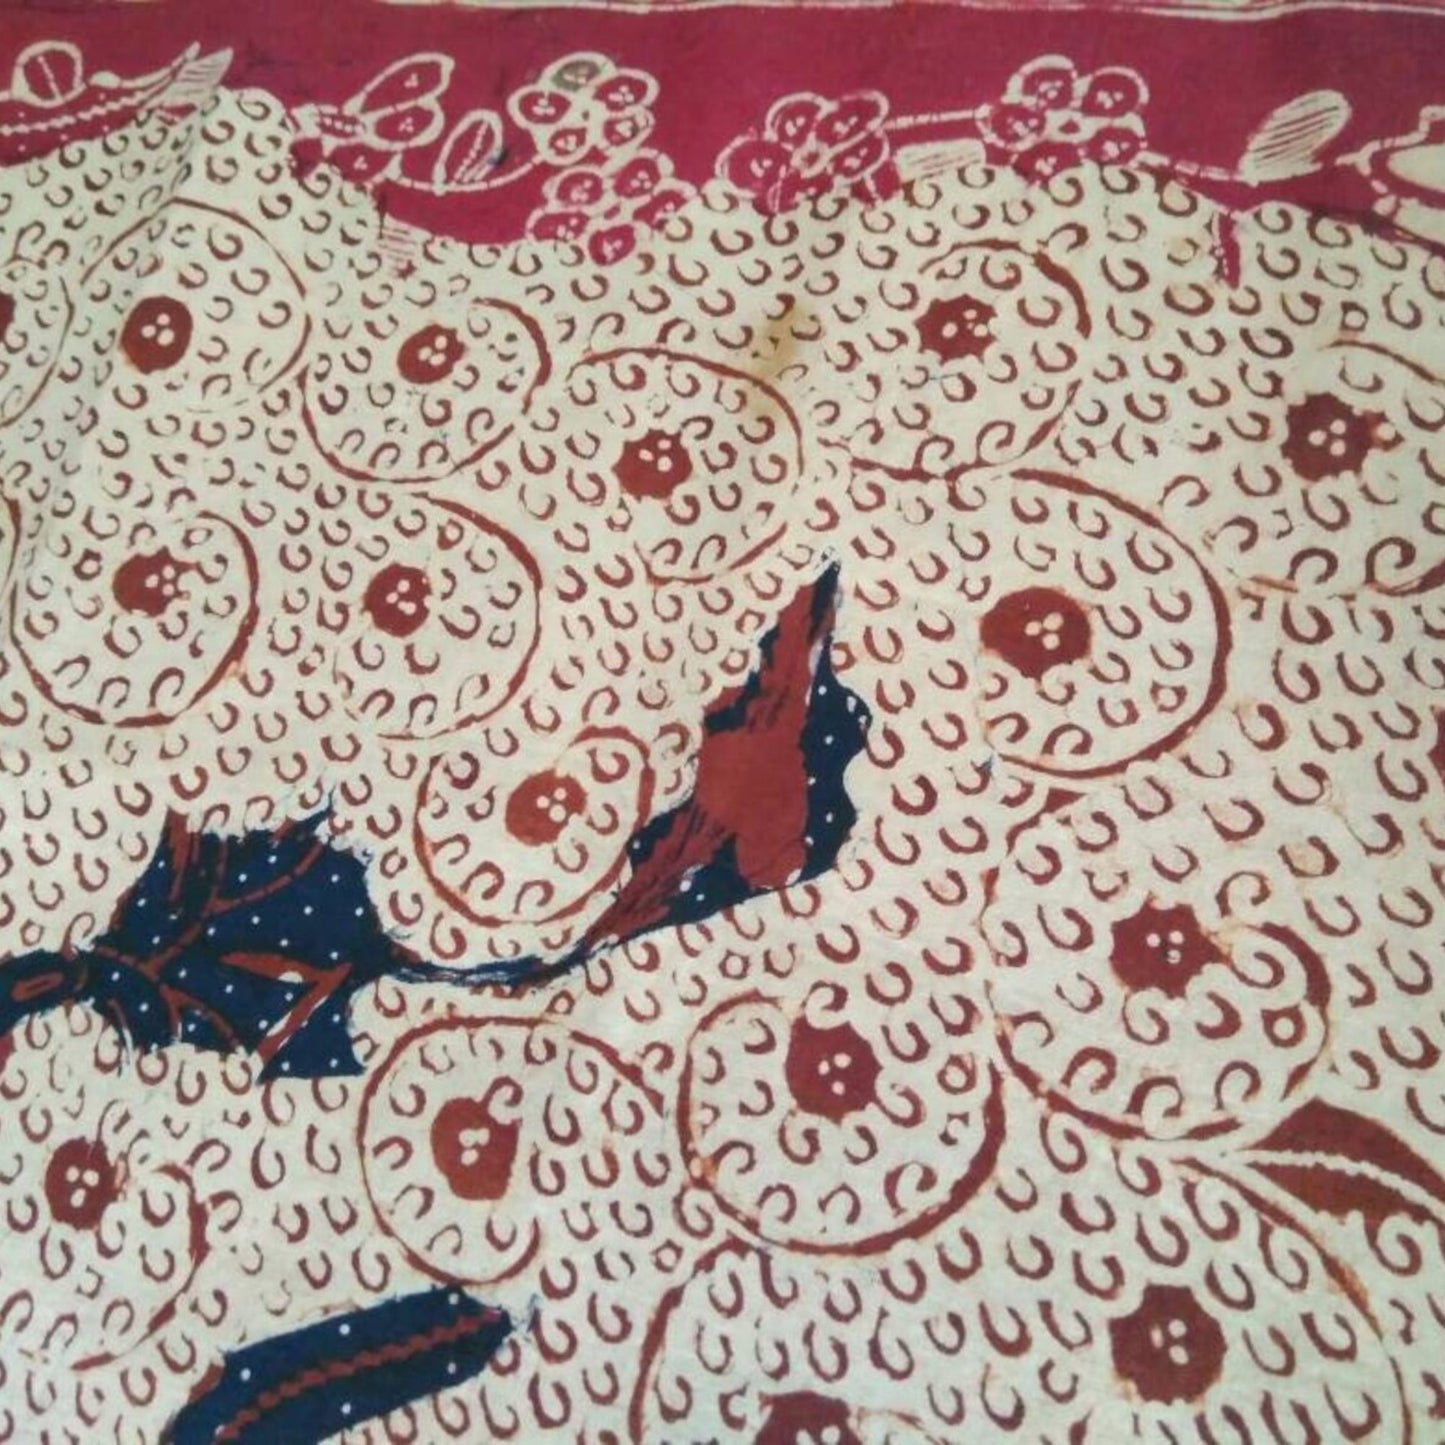 Vintage Indonesian Hand Drawn Batik with Peacock and Floral Background